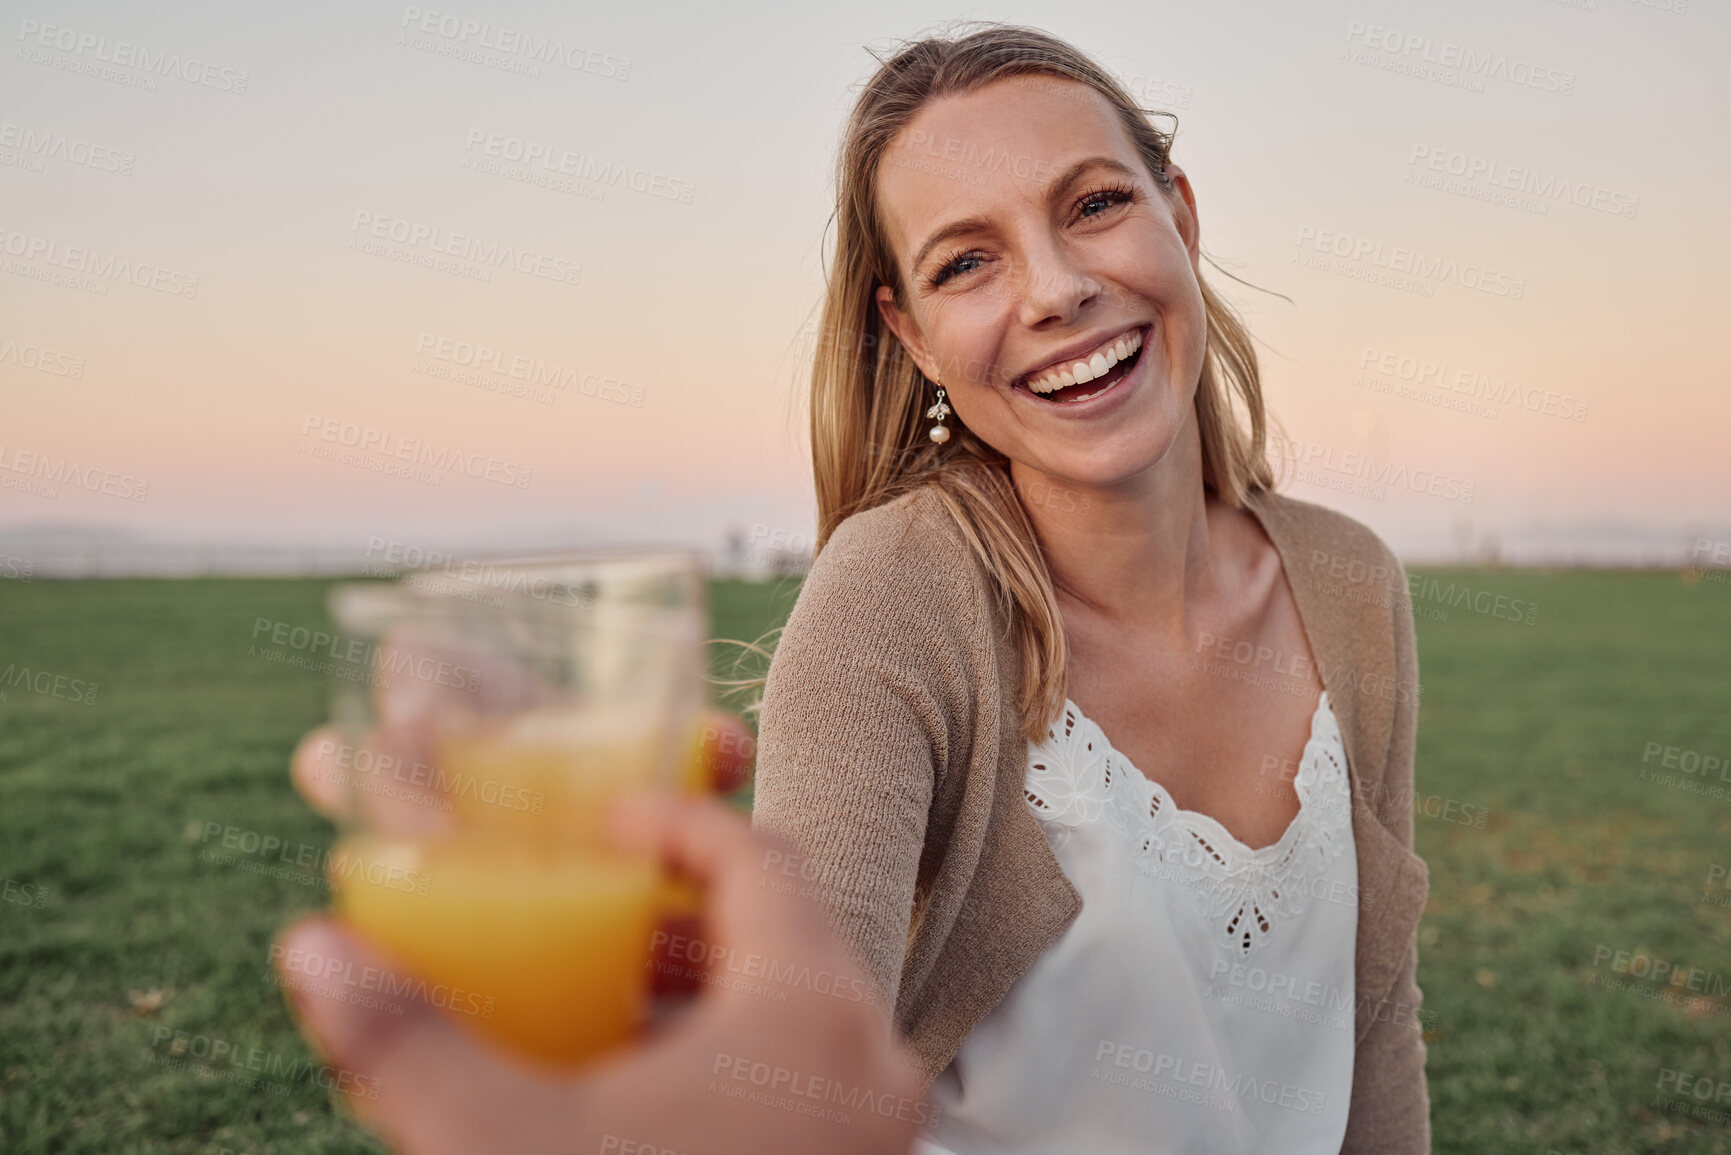 Buy stock photo Cheers, juice and portrait of a happy woman in nature on an outdoor picnic in a garden with a summer sunset. Happiness, smile and pov of a lady toasting with a orange drink while on a romantic date.